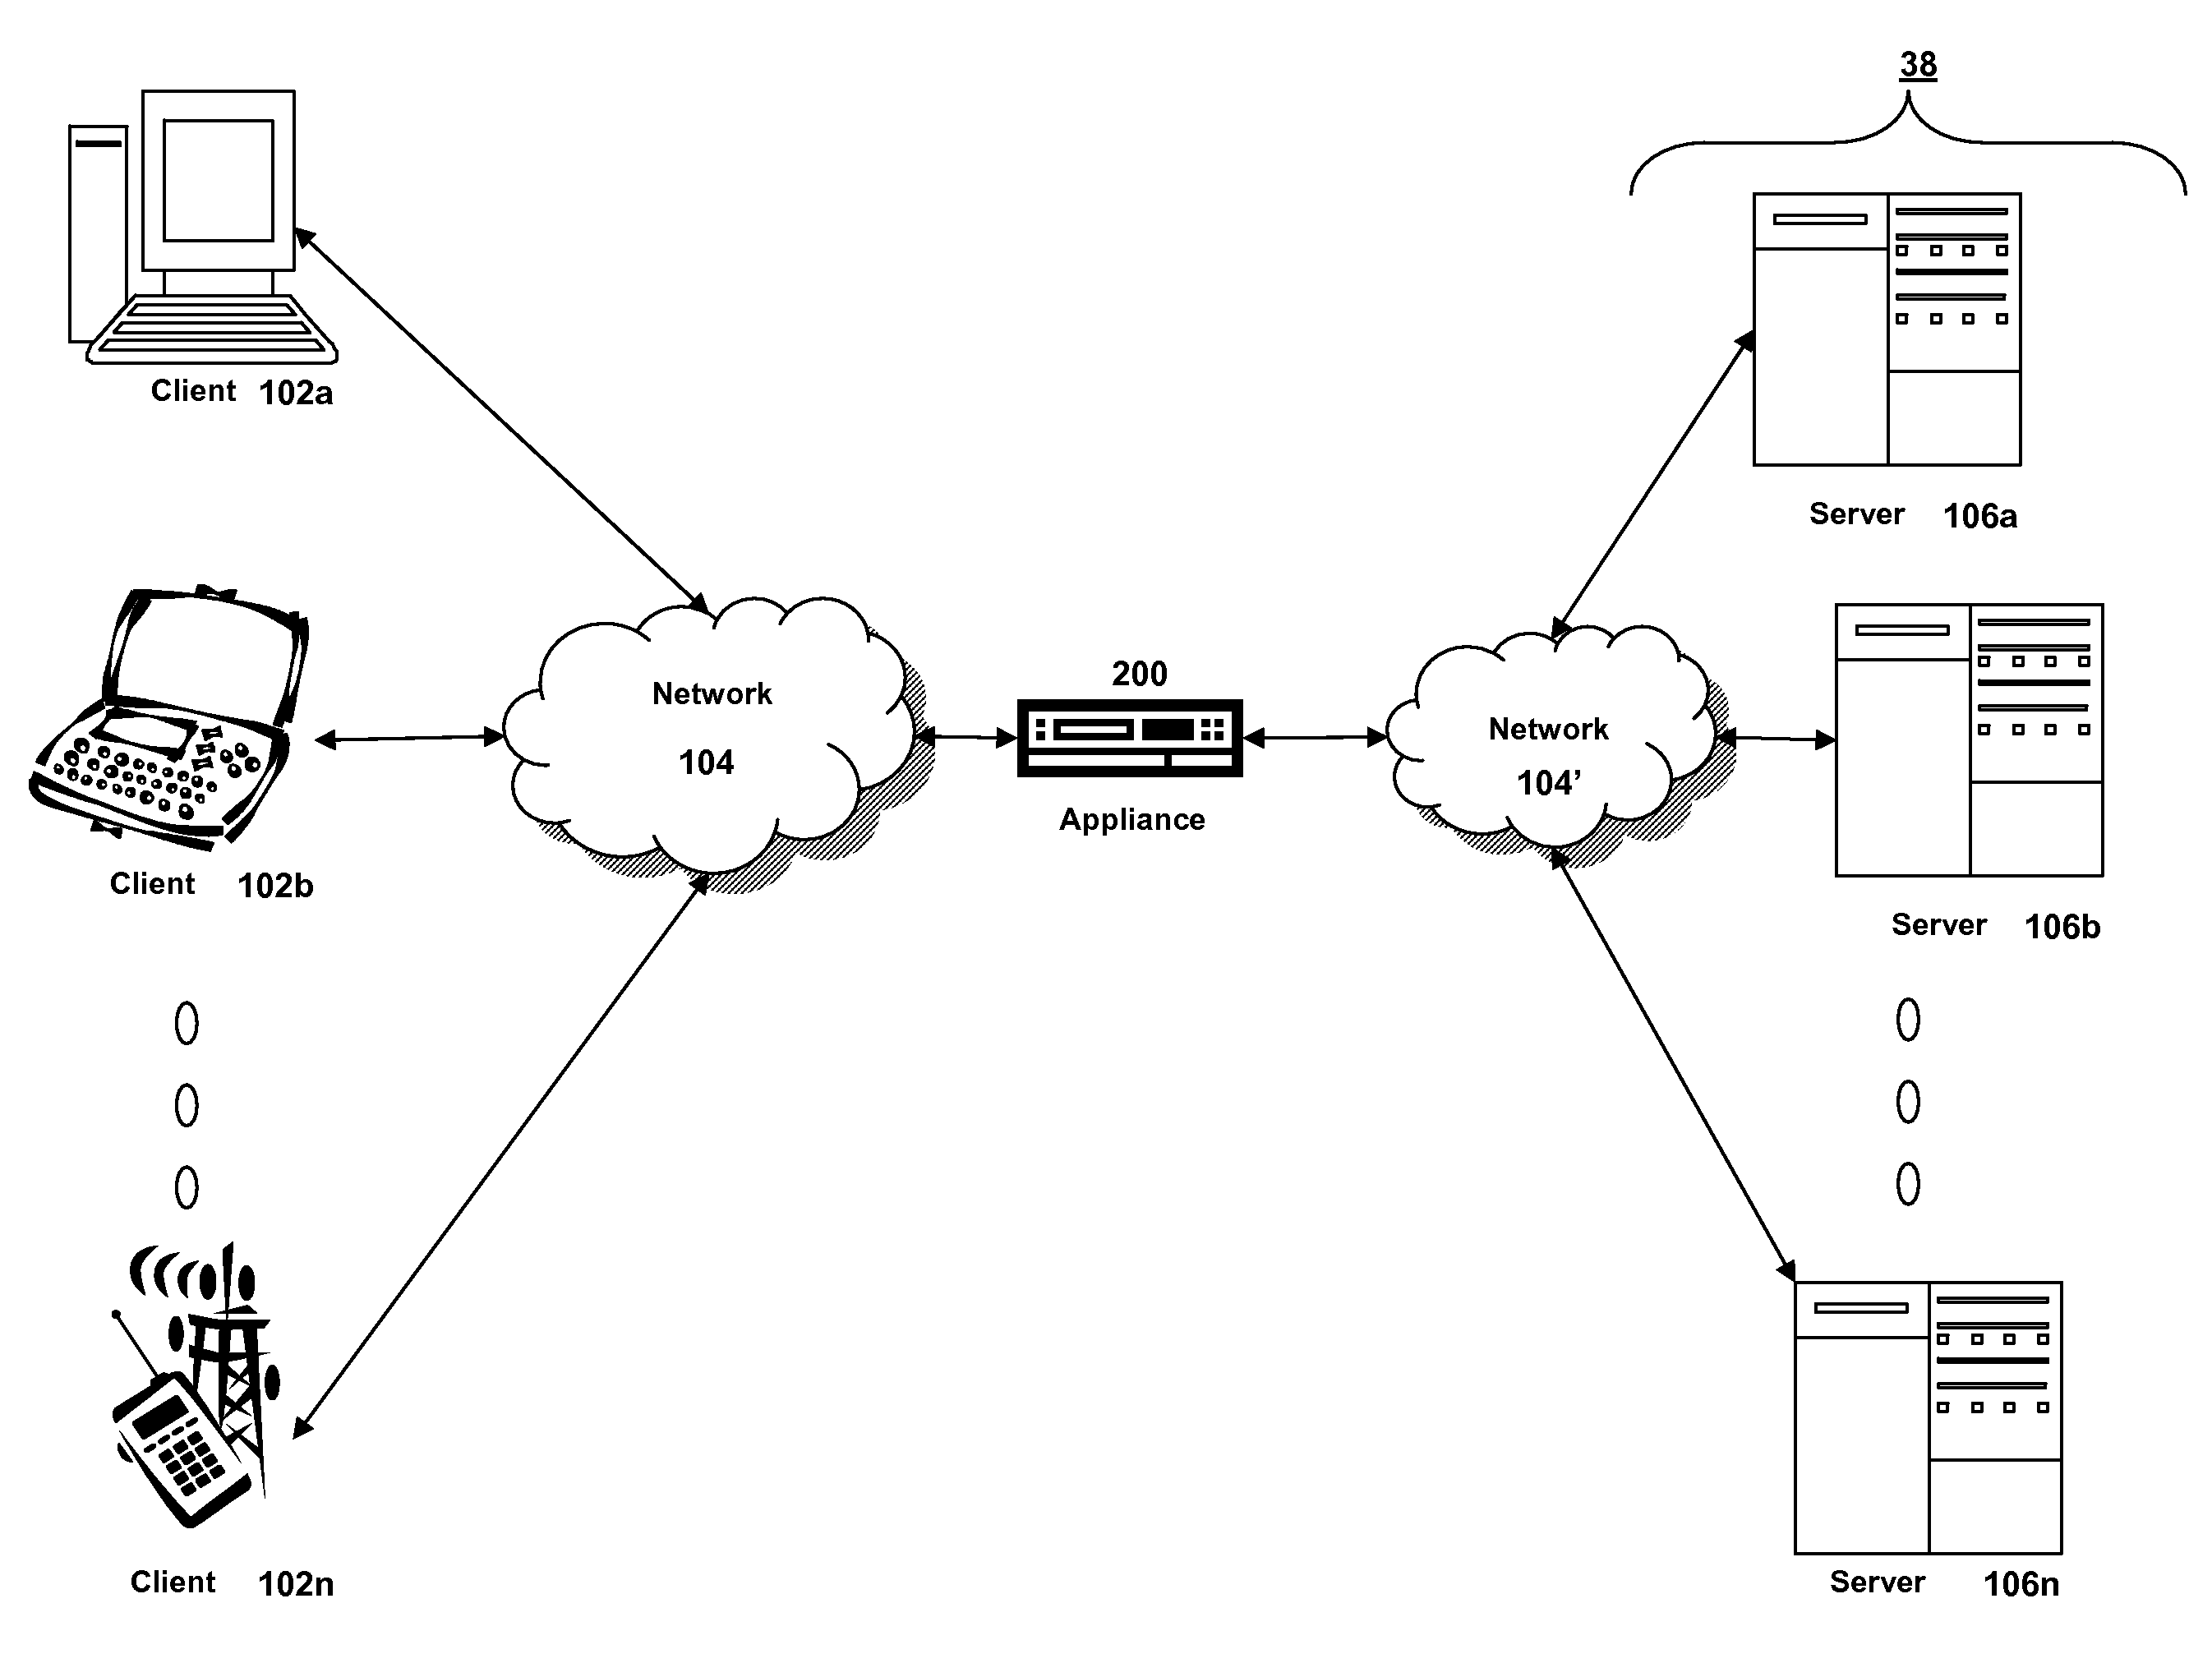 Systems and methods for providing stuctured policy expressions to represent unstructured data in a network appliance